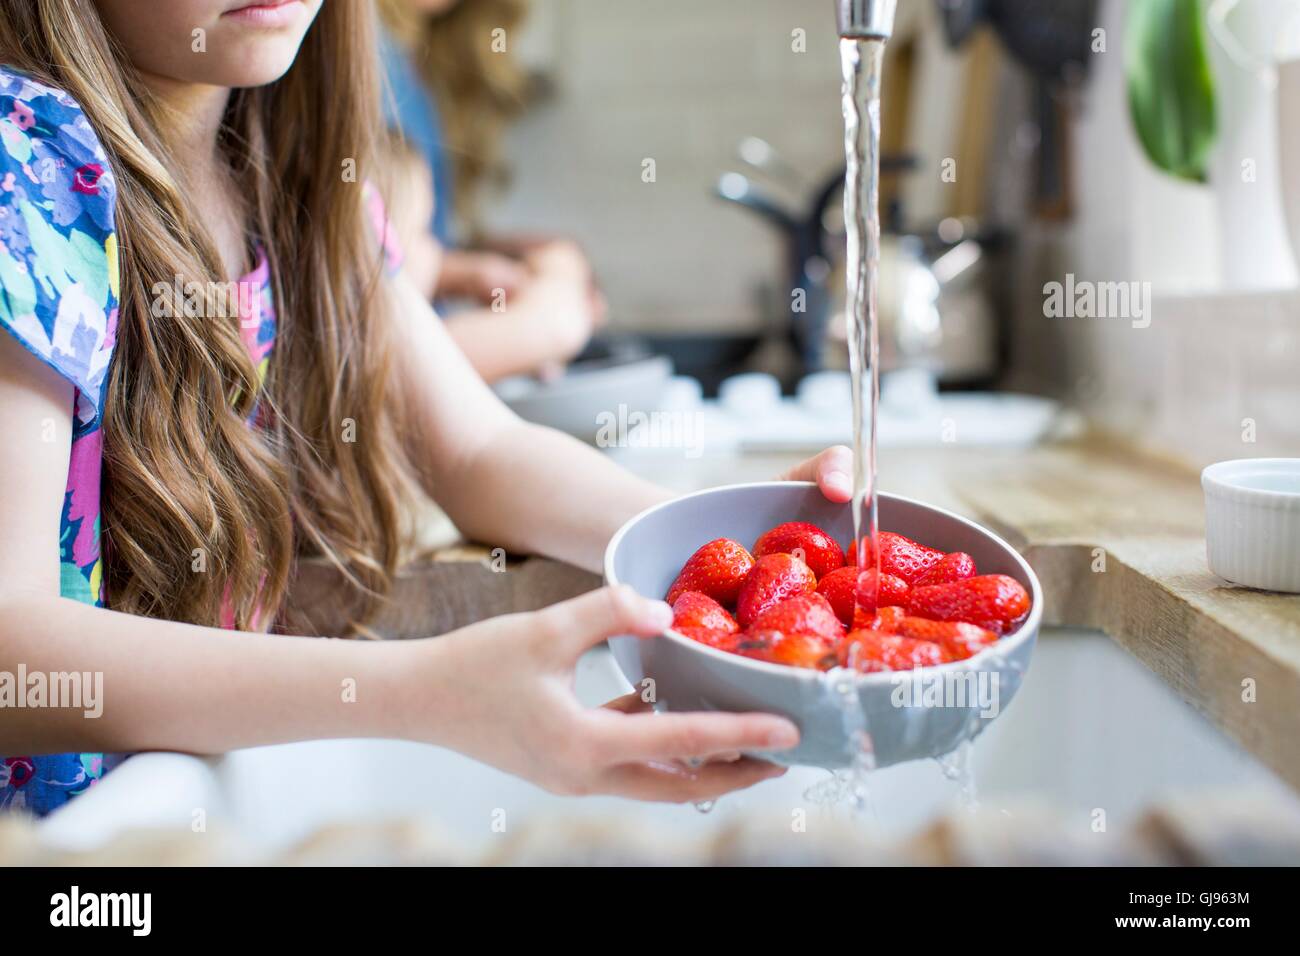 PROPERTY RELEASED. MODEL RELEASED. Girl washing fresh strawberries in the sink. Stock Photo